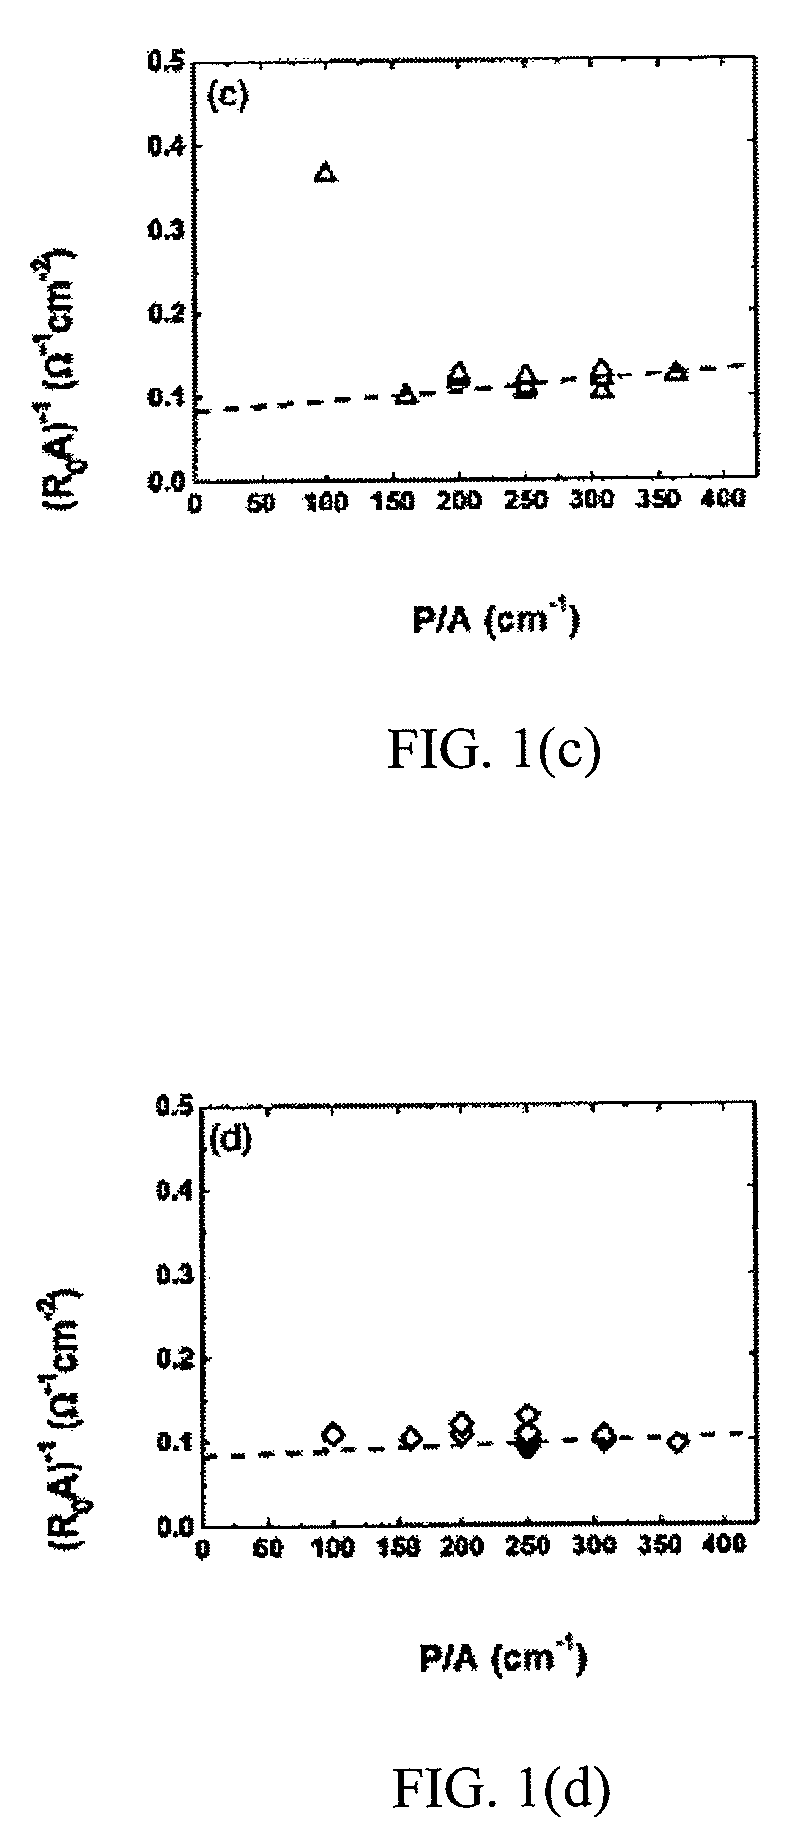 Superlattice photodiodes with polyimide surface passivation